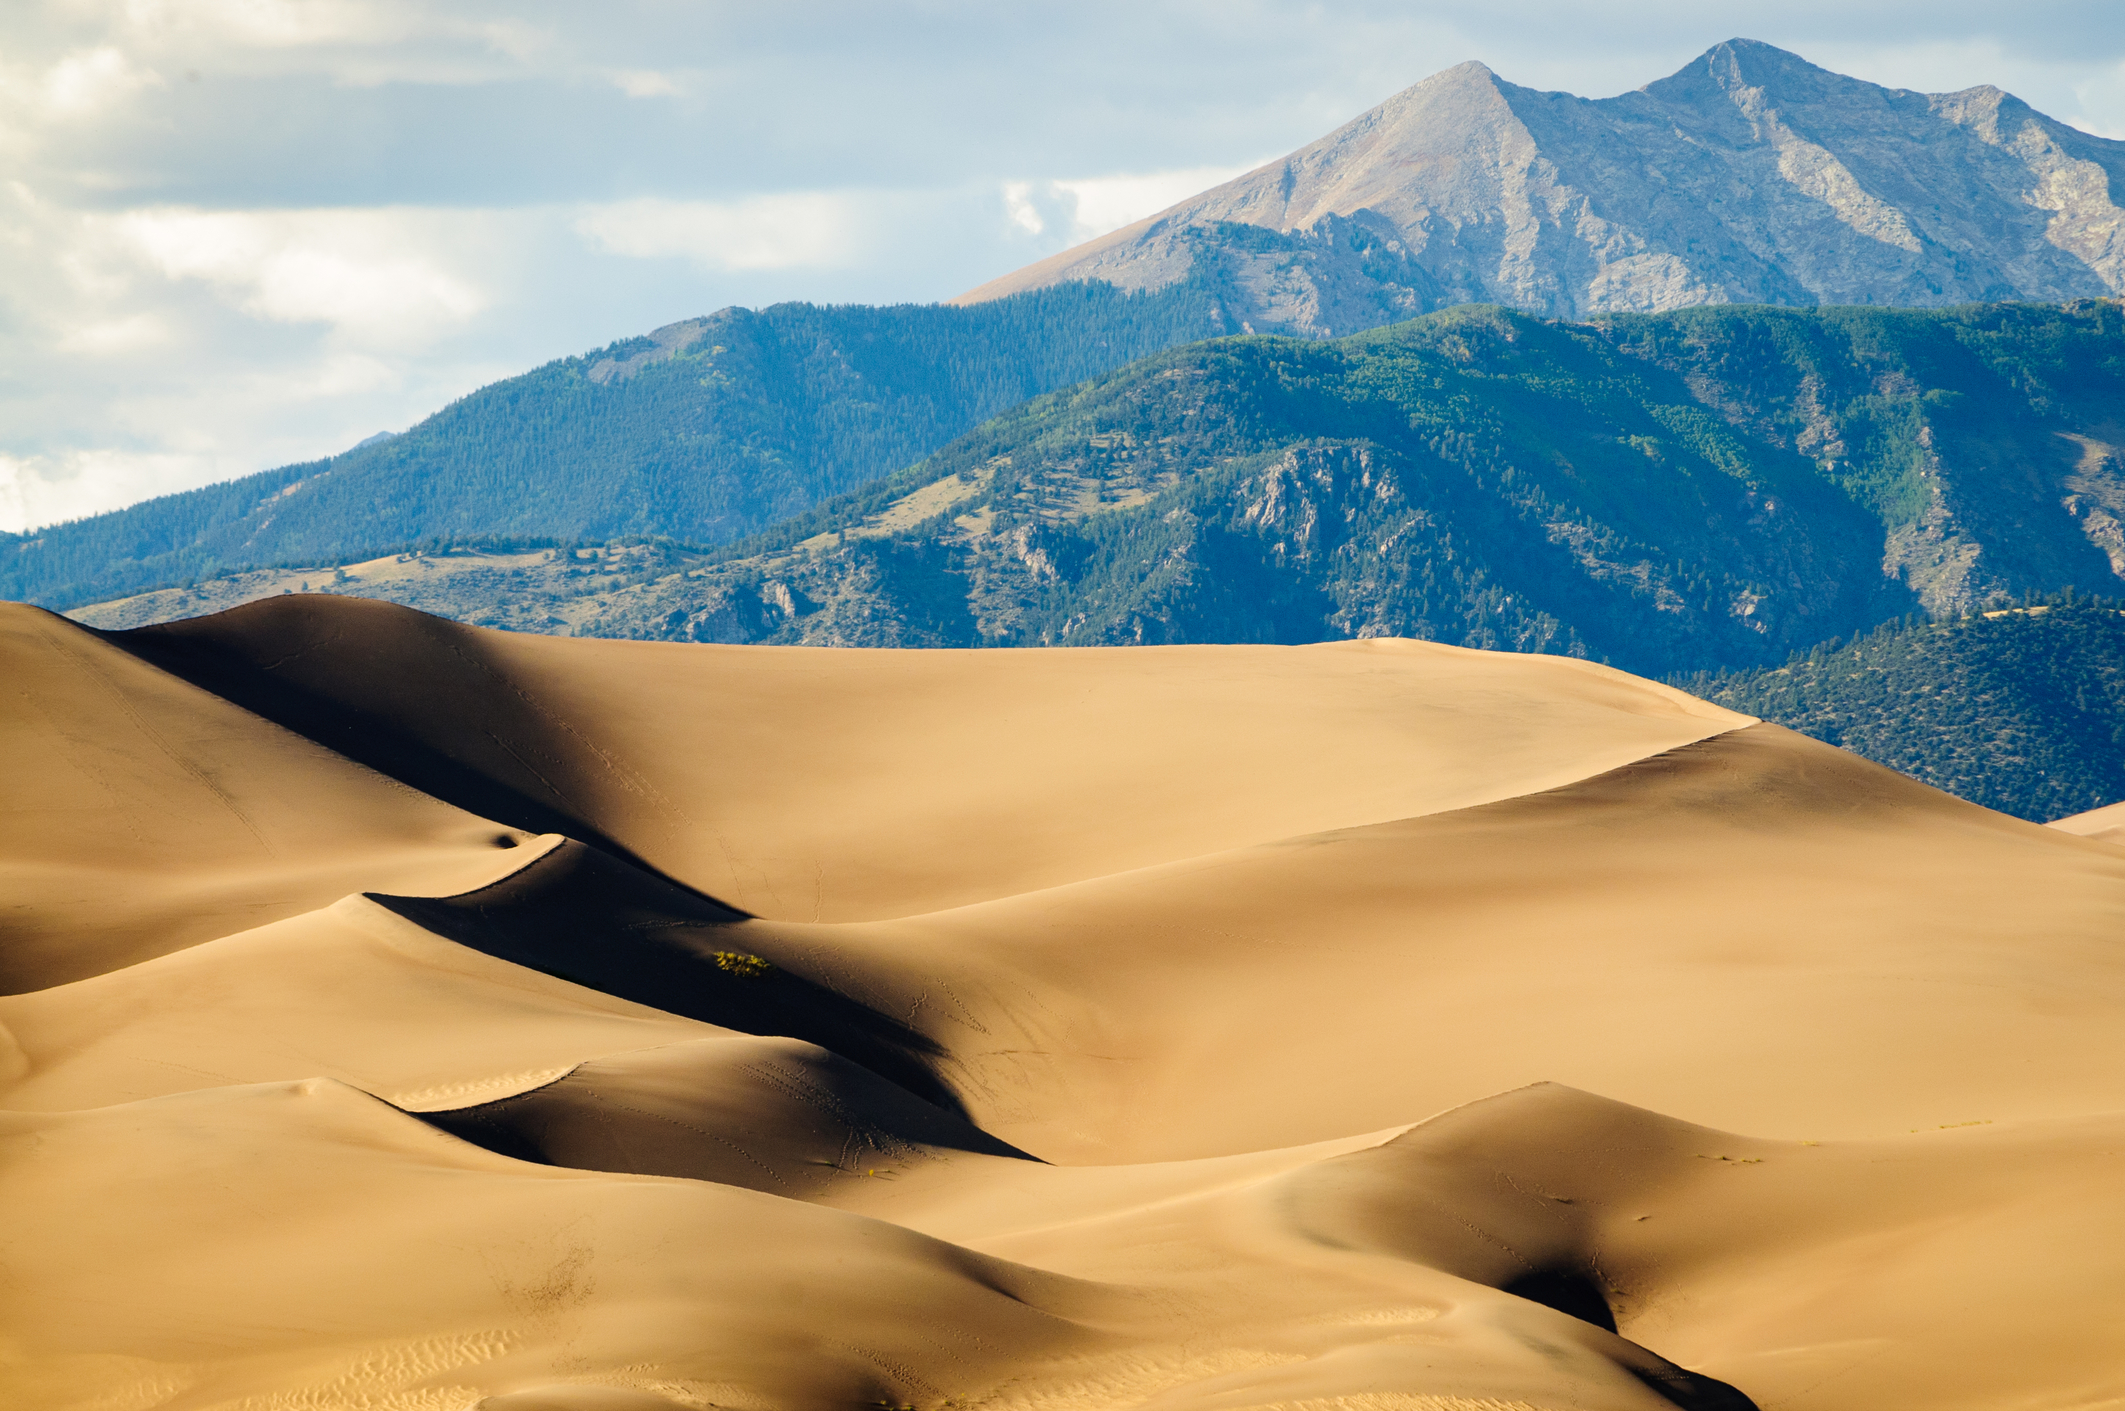 sand dunes with mountain range in backgroud